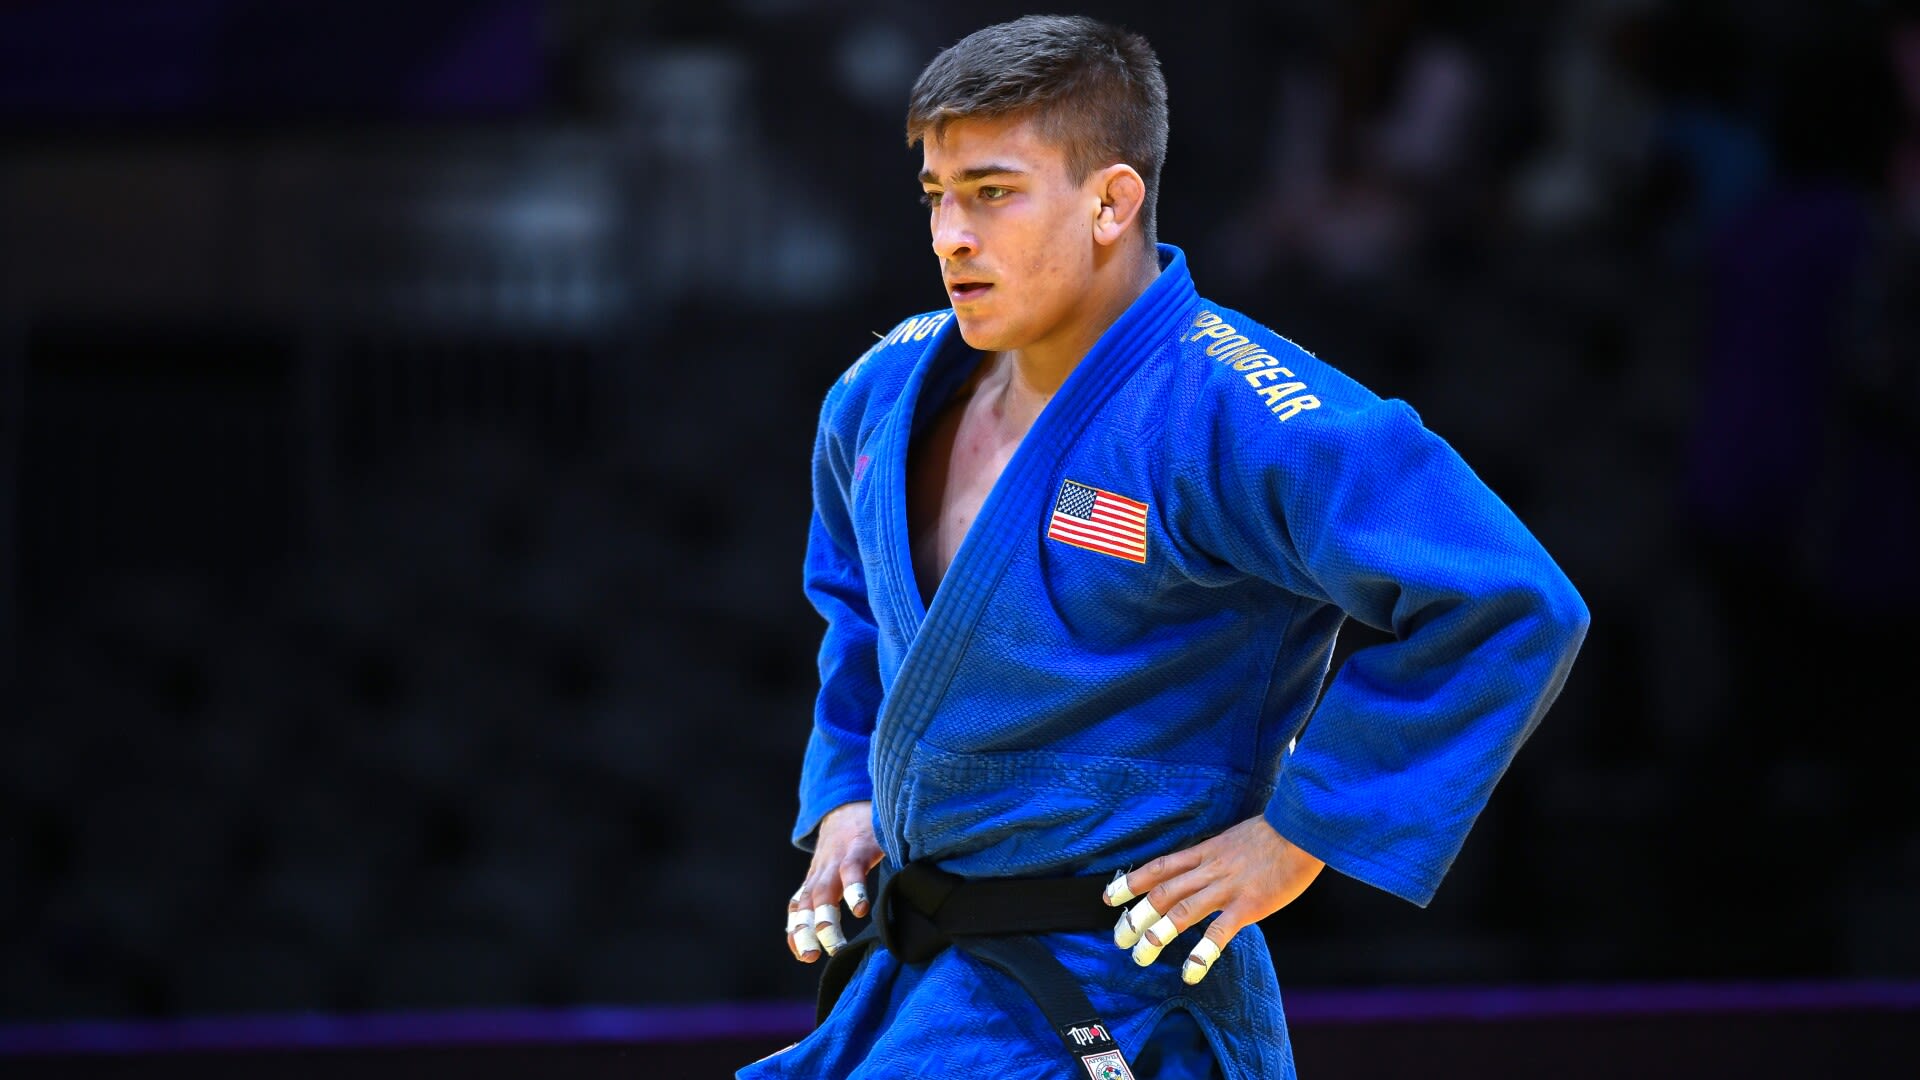 In judo, Jack Yonezuka earns Olympic experience his dad missed in 1980